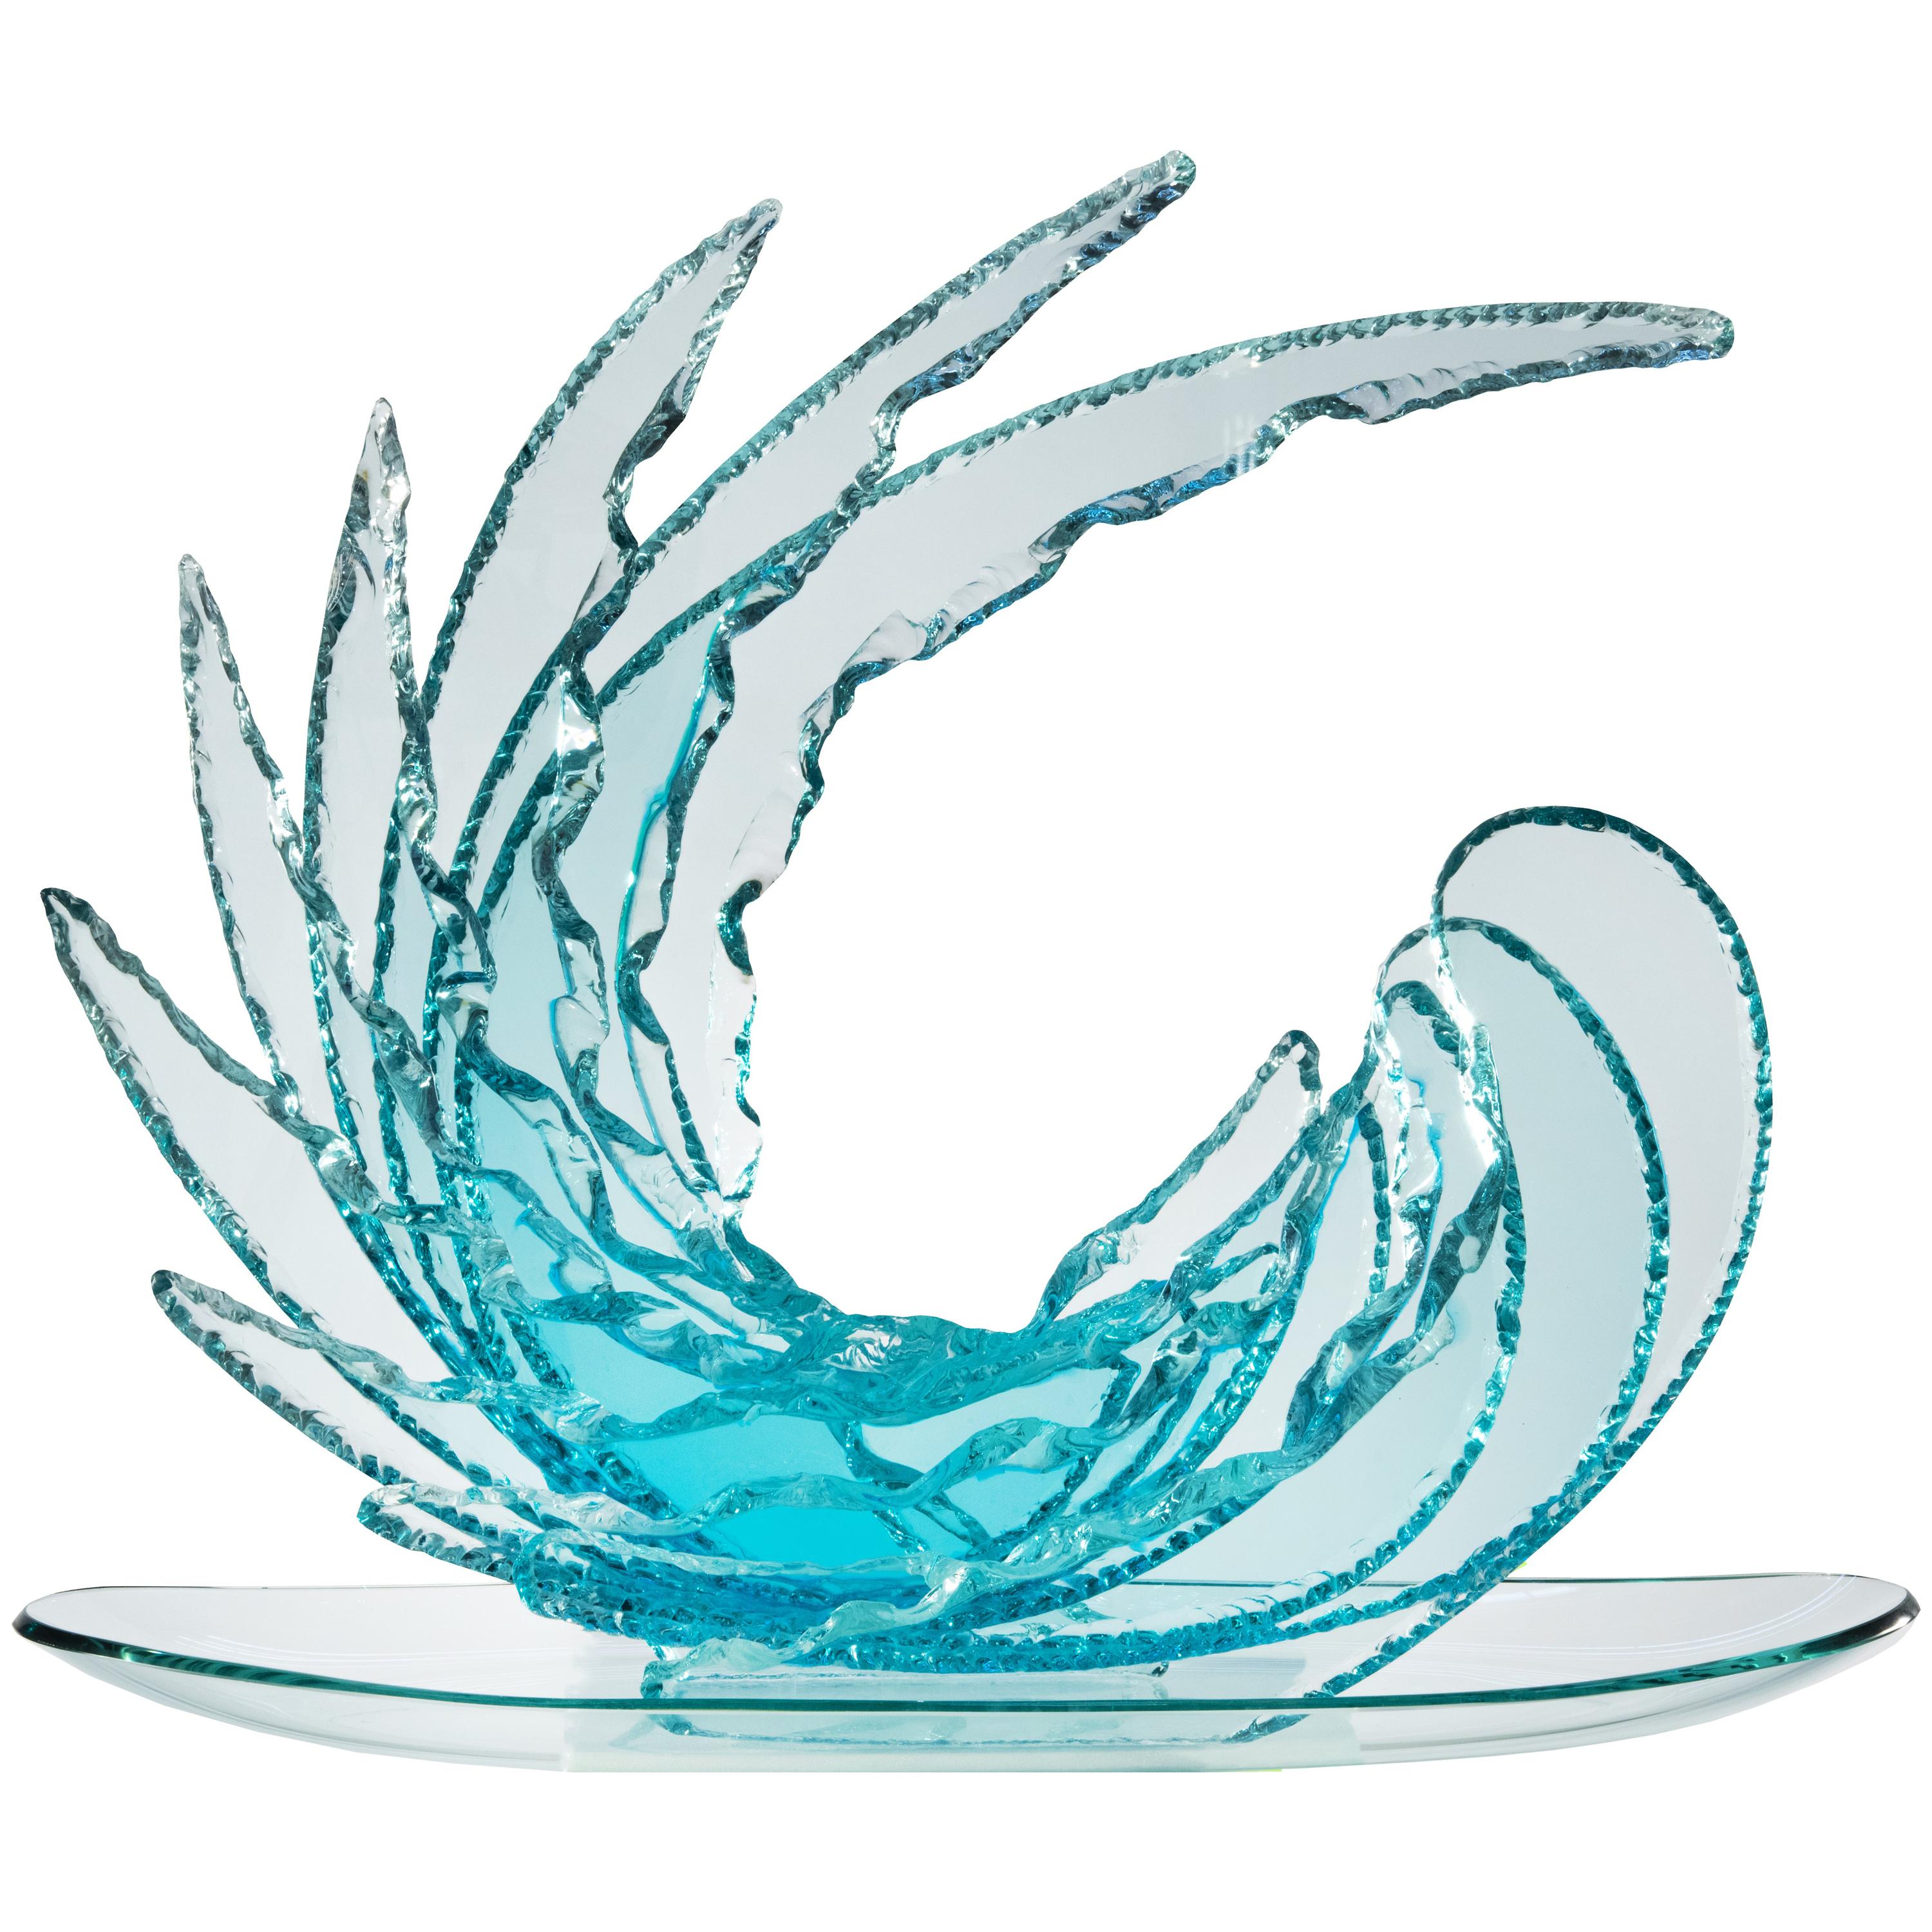 Contemporary 'Wave' Crystal Sculpture Aquamarine Handcrafted by Ghirò Studio